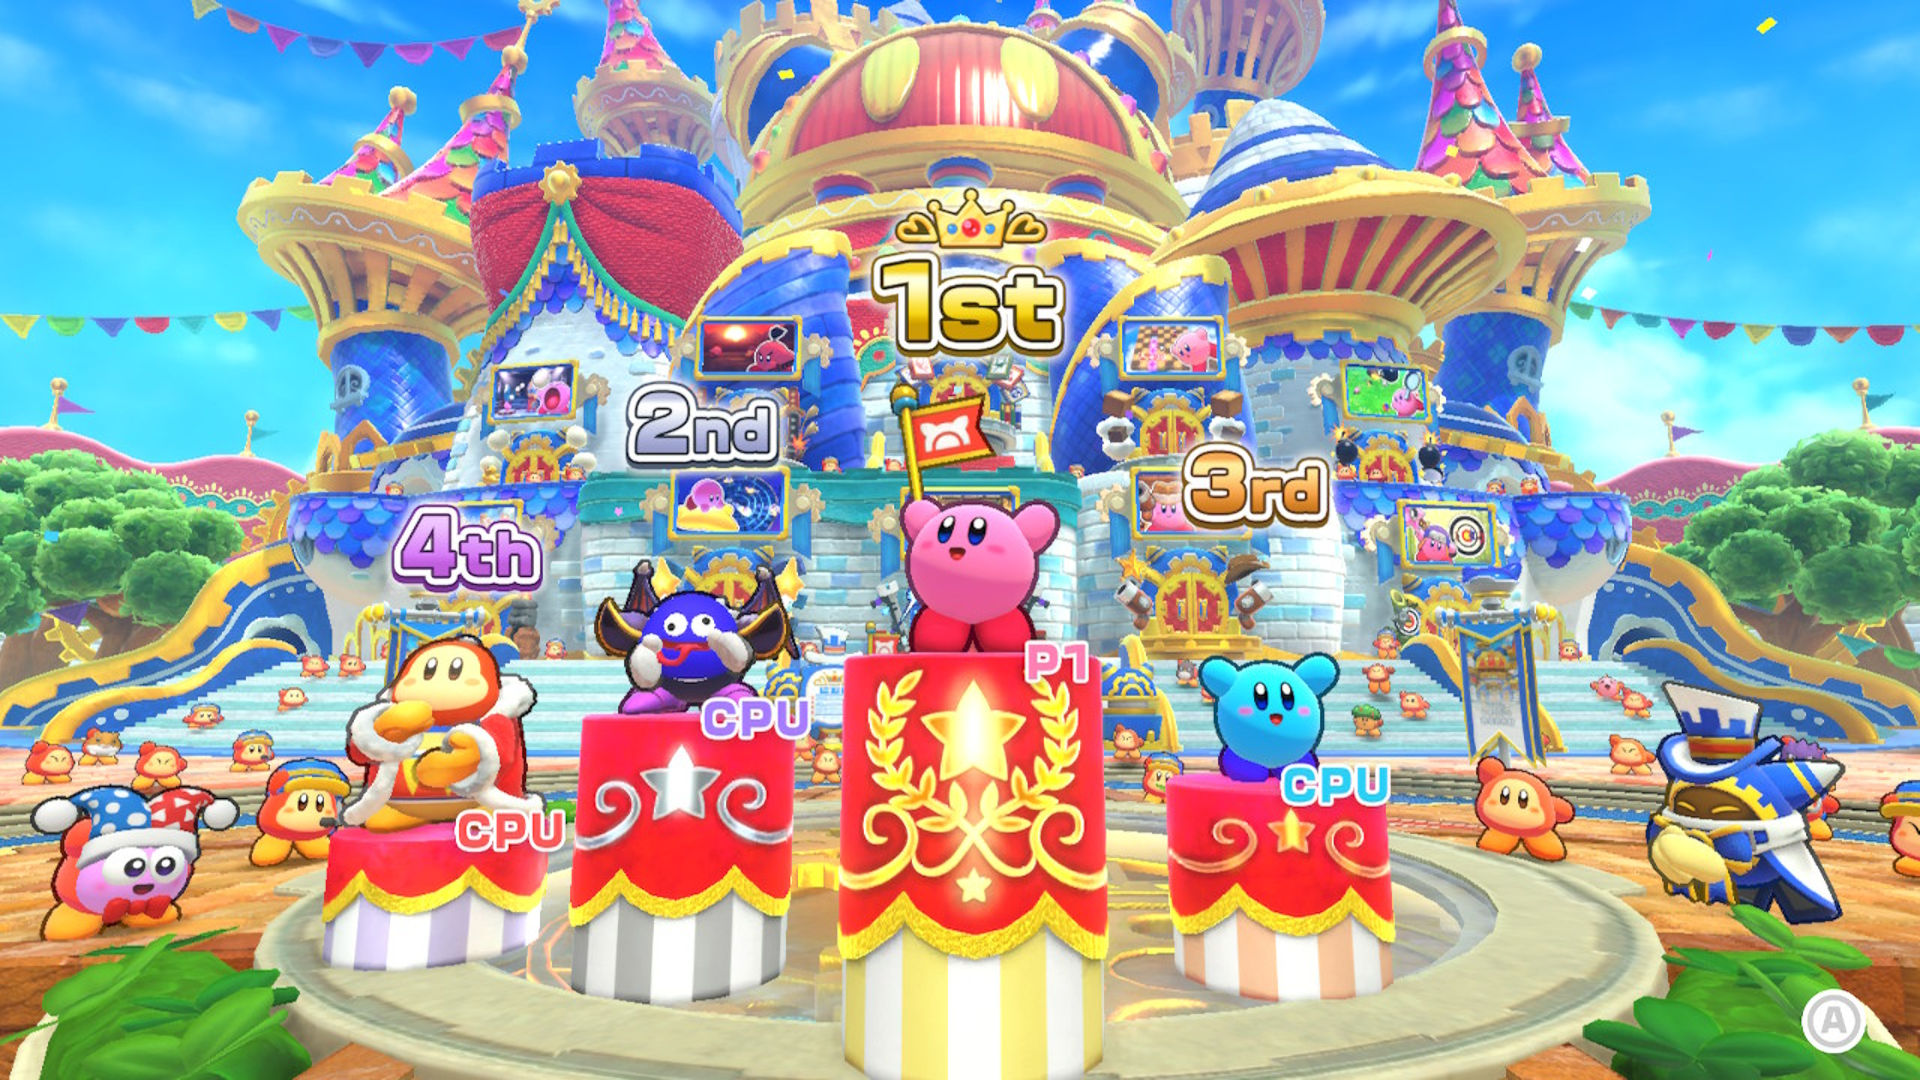 Kirby's Return to Dream Land Deluxe review – delightfully dreamy